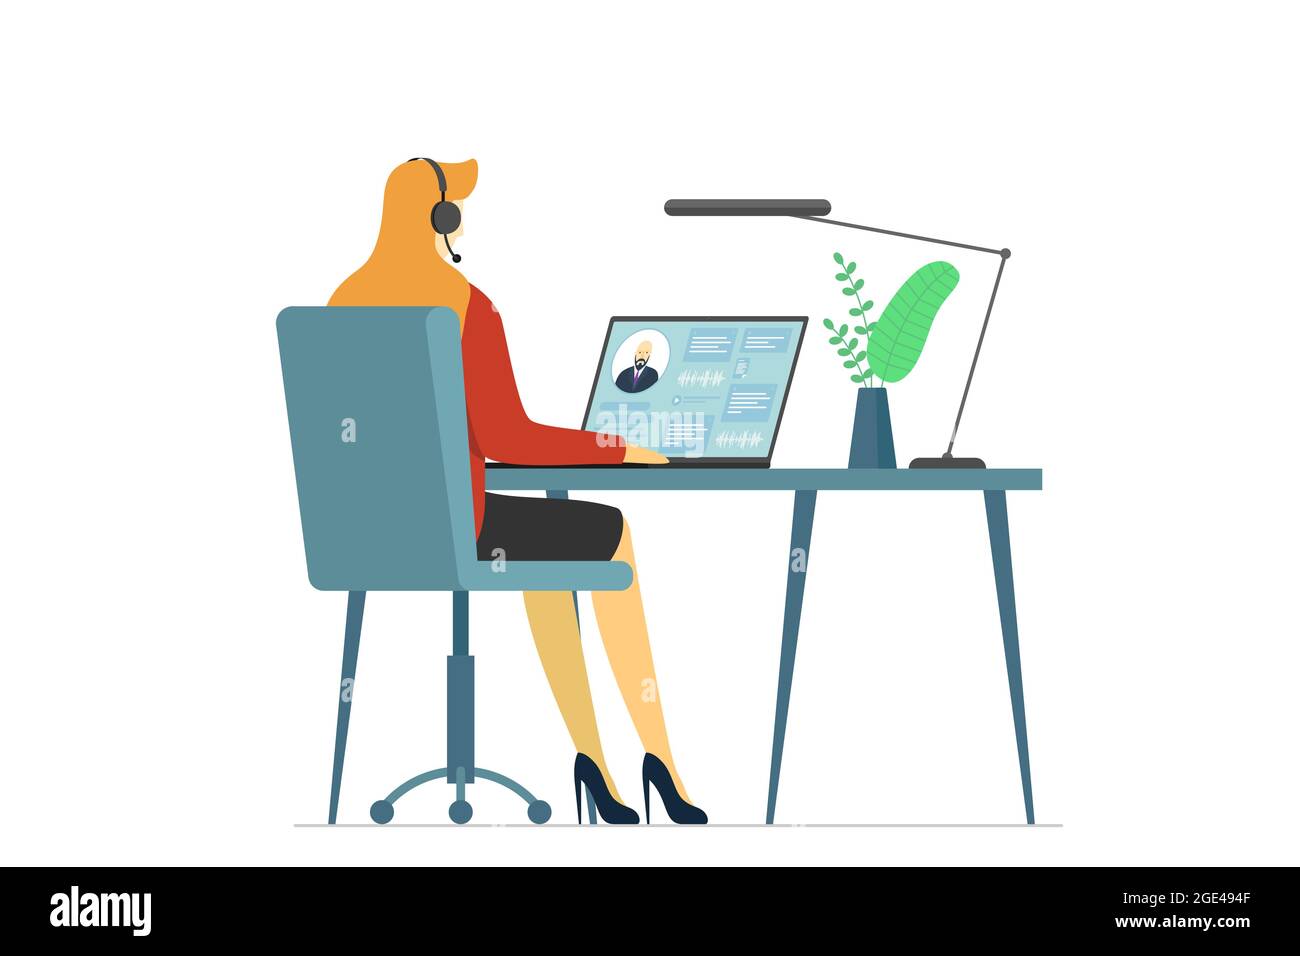 Call center operator woman and client information on laptop screen. Female hotline or cold calling employee. Online support service department staff, telemarketing, consultation and assistance centre Stock Vector